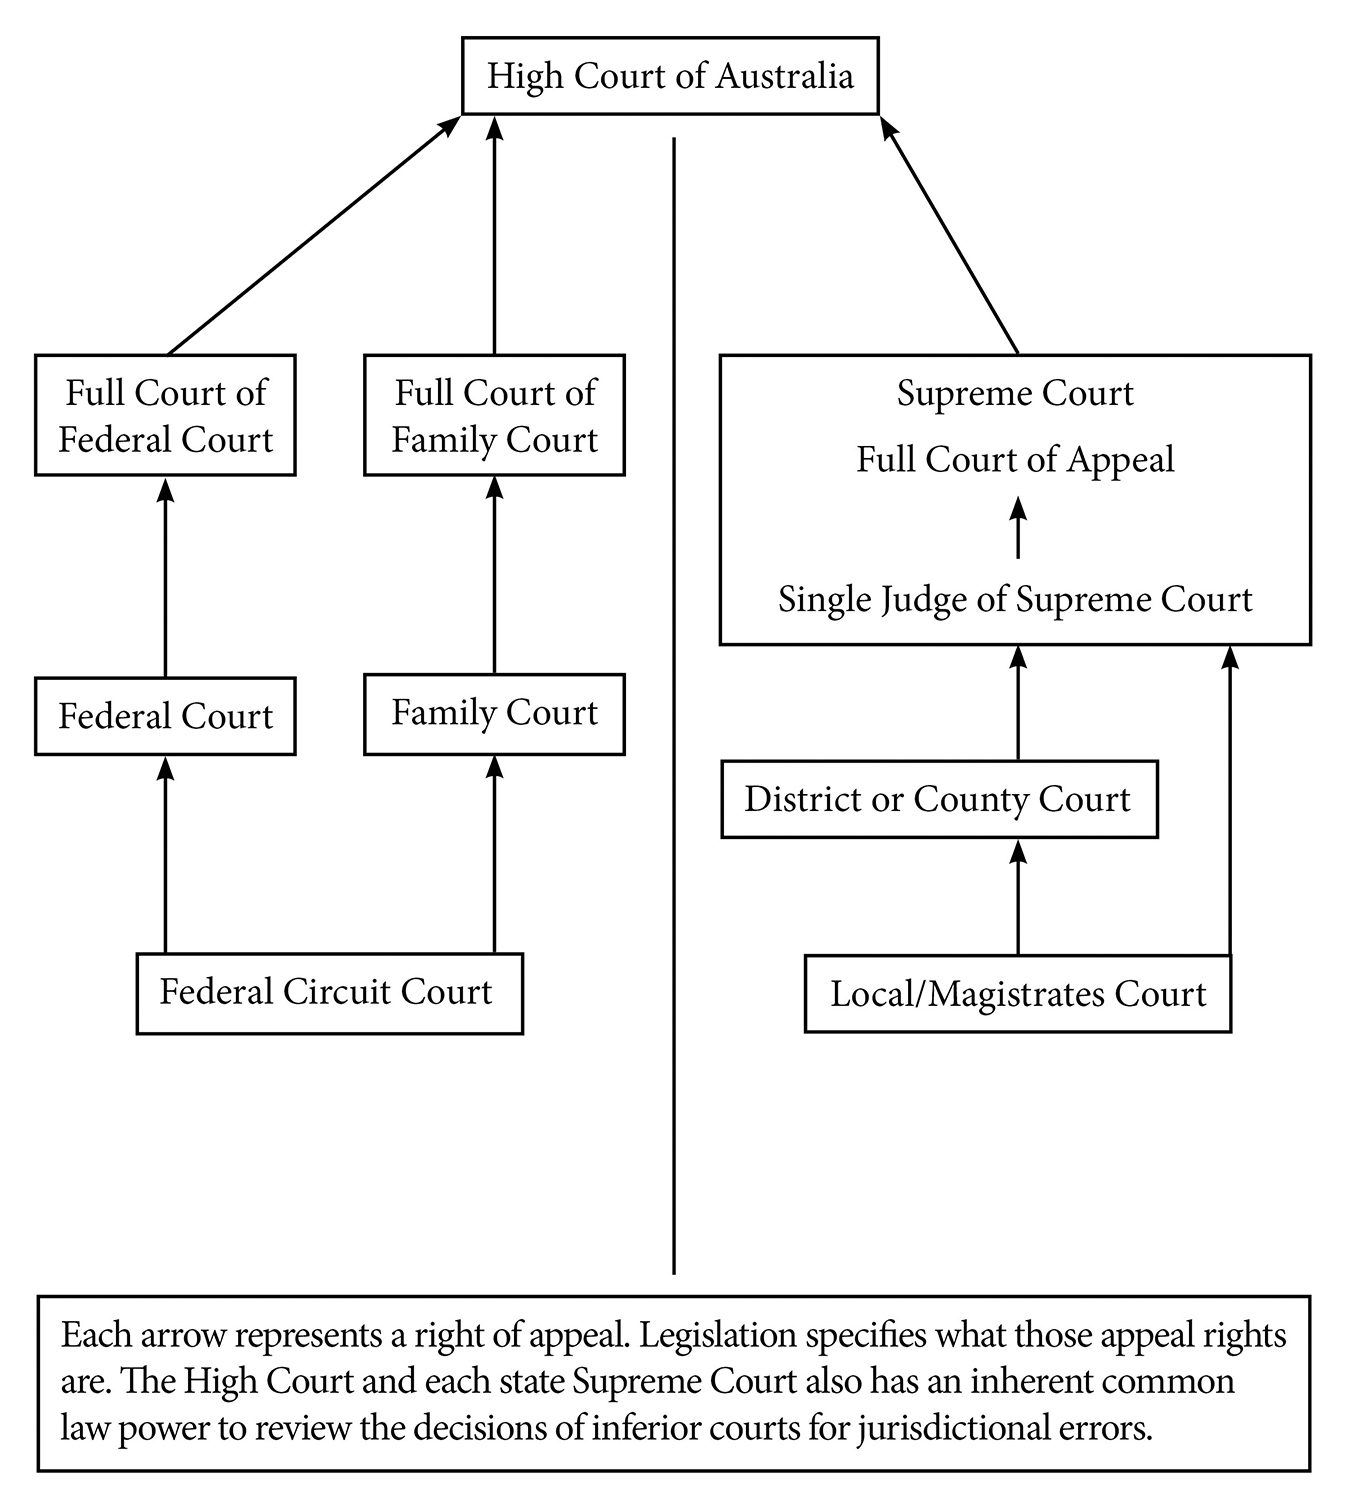 A diagram showing the court hierarchy in Australia. At the bottom of the hierarchy is the Federal Circuit Court and Local/Magistrates Court, at the next level is the Federal Court, Family Court and District or County Court, at the next level is the Supreme Court, at the next level the Full Court of the Federal Court, Full Court of the Family Court and Full Court of Appeal of the Supreme Court and at the apex is the High Court.